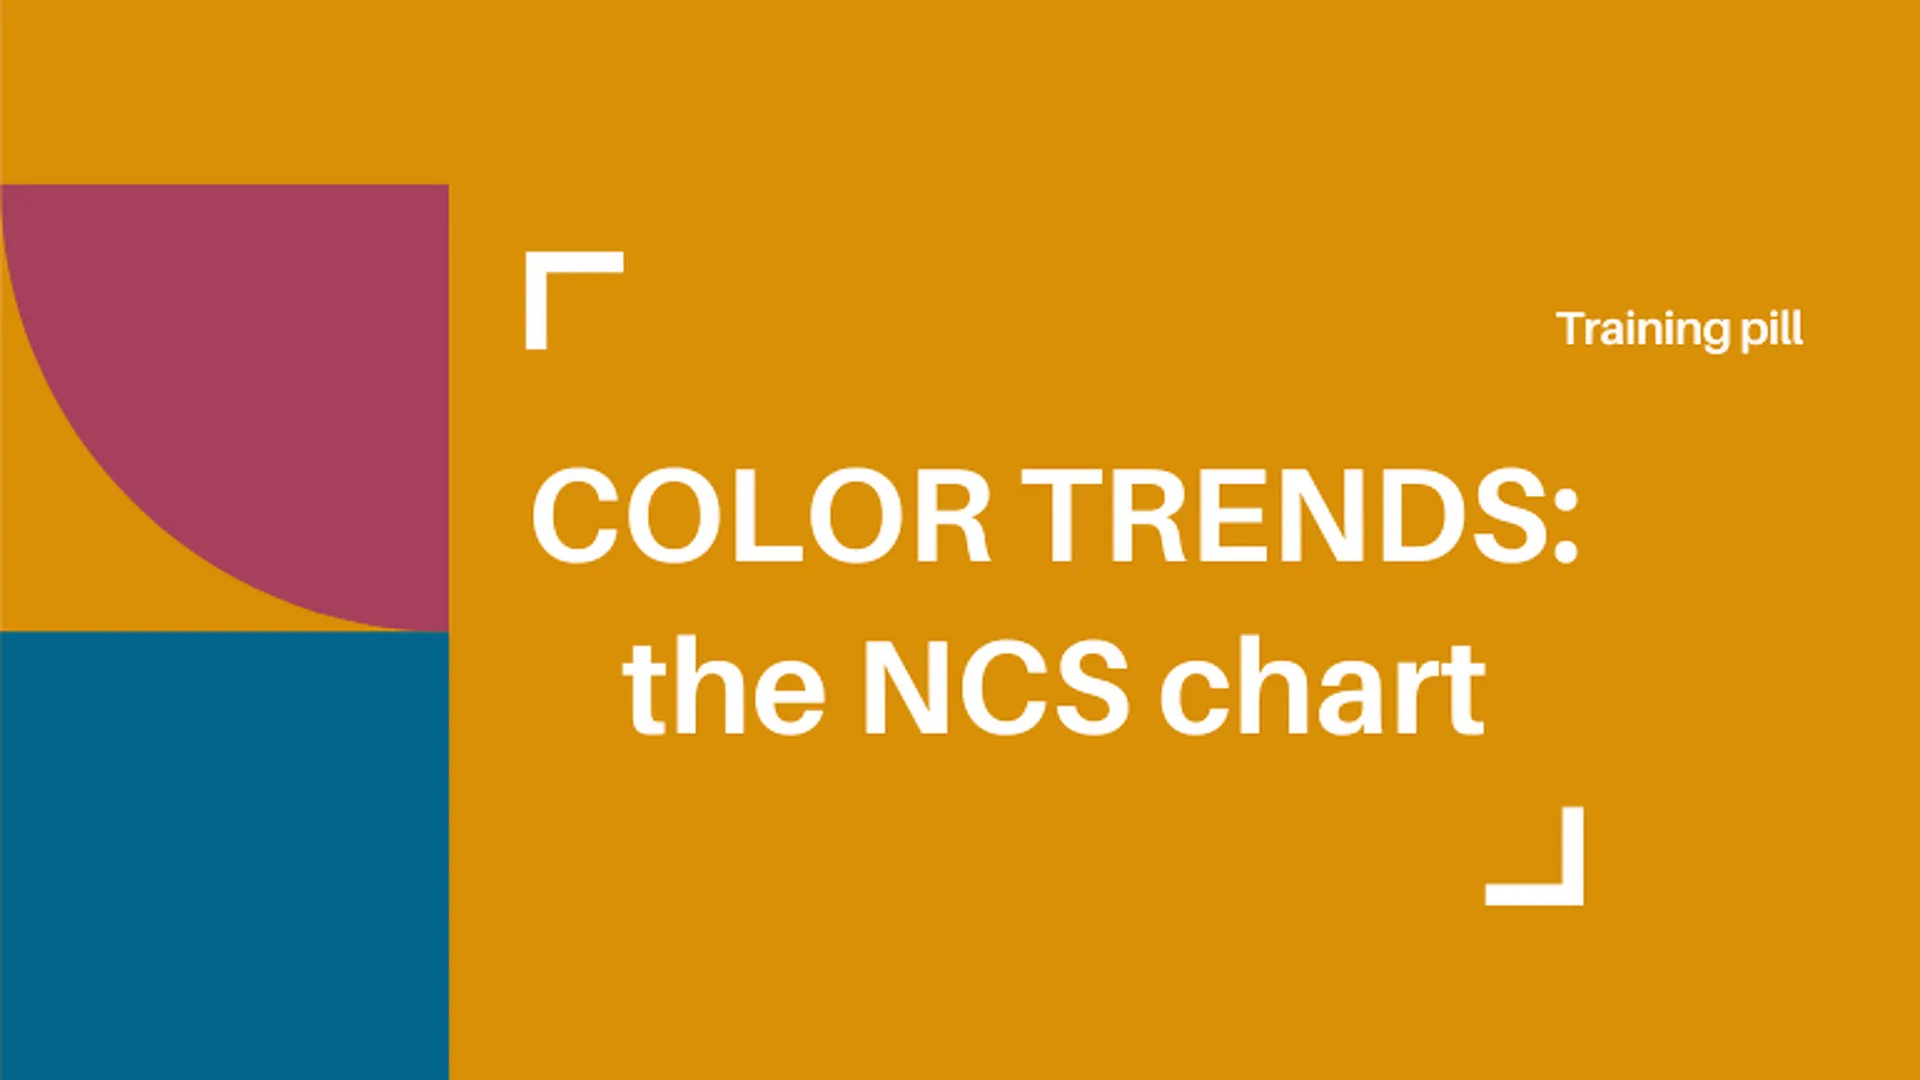 COLOR TRENDS: the NCS CHART